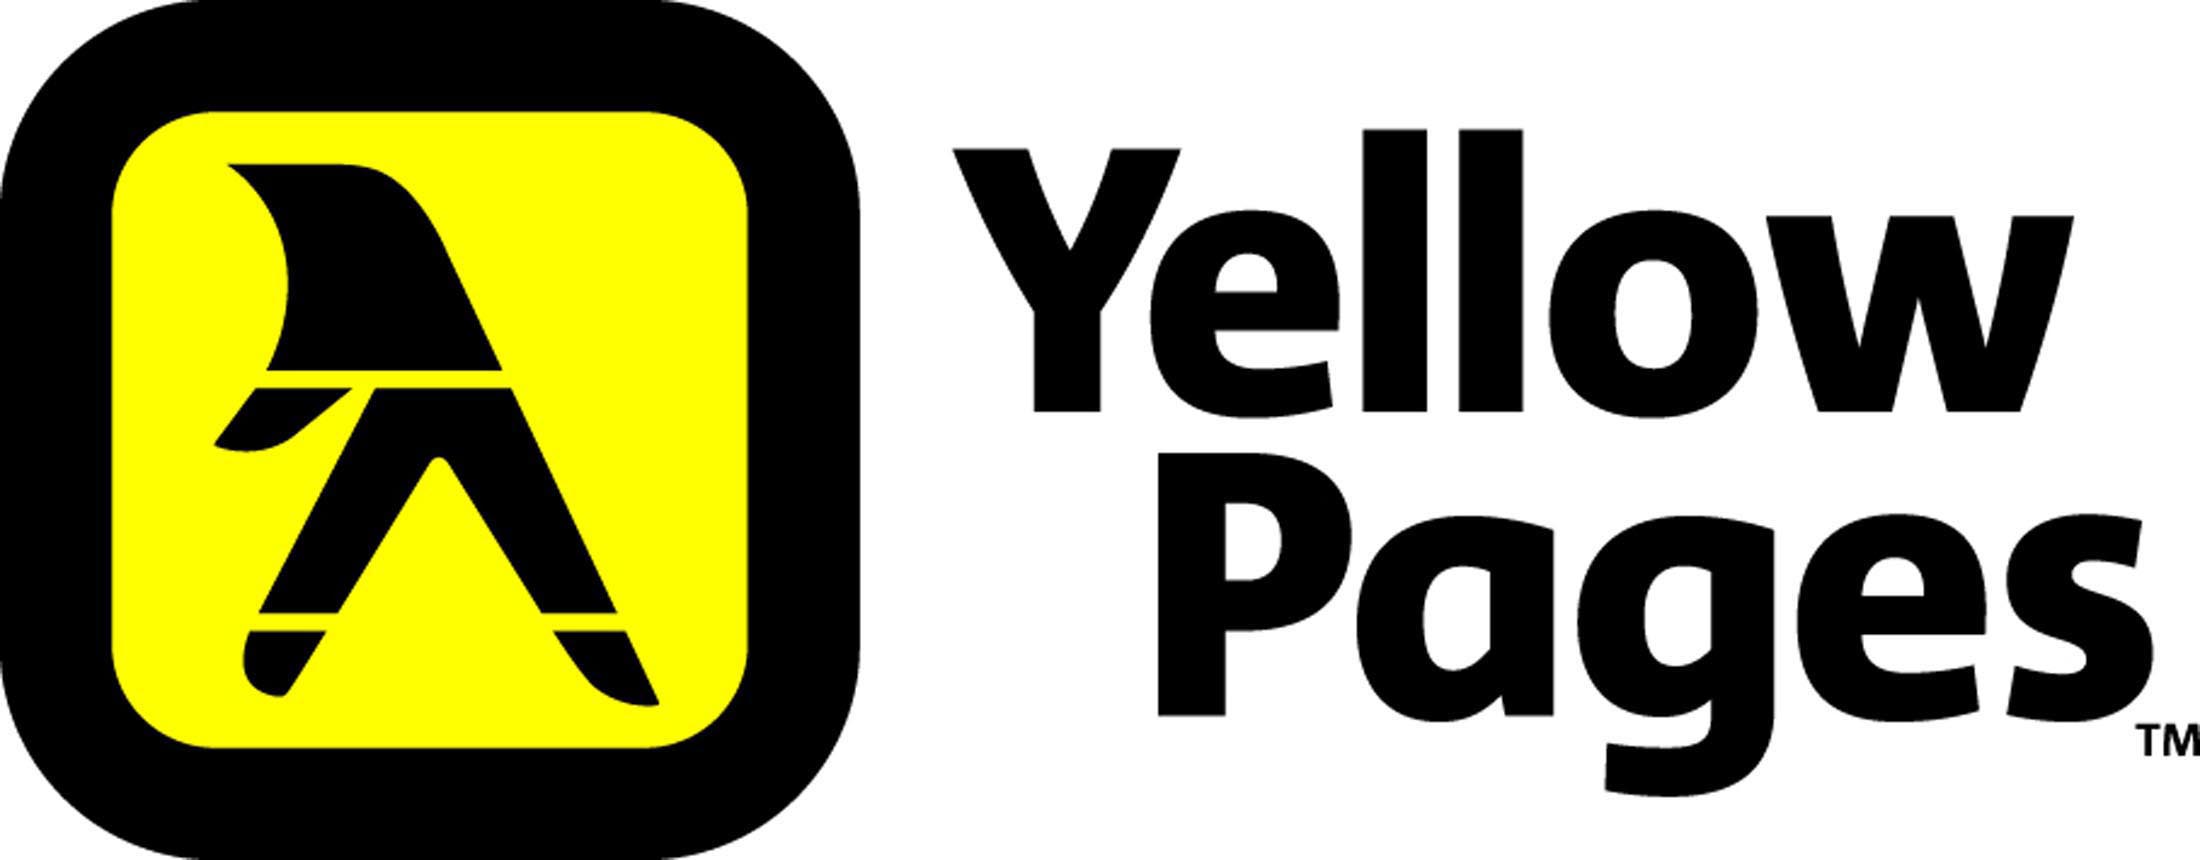 Yellow Pages Logo Wallpaper